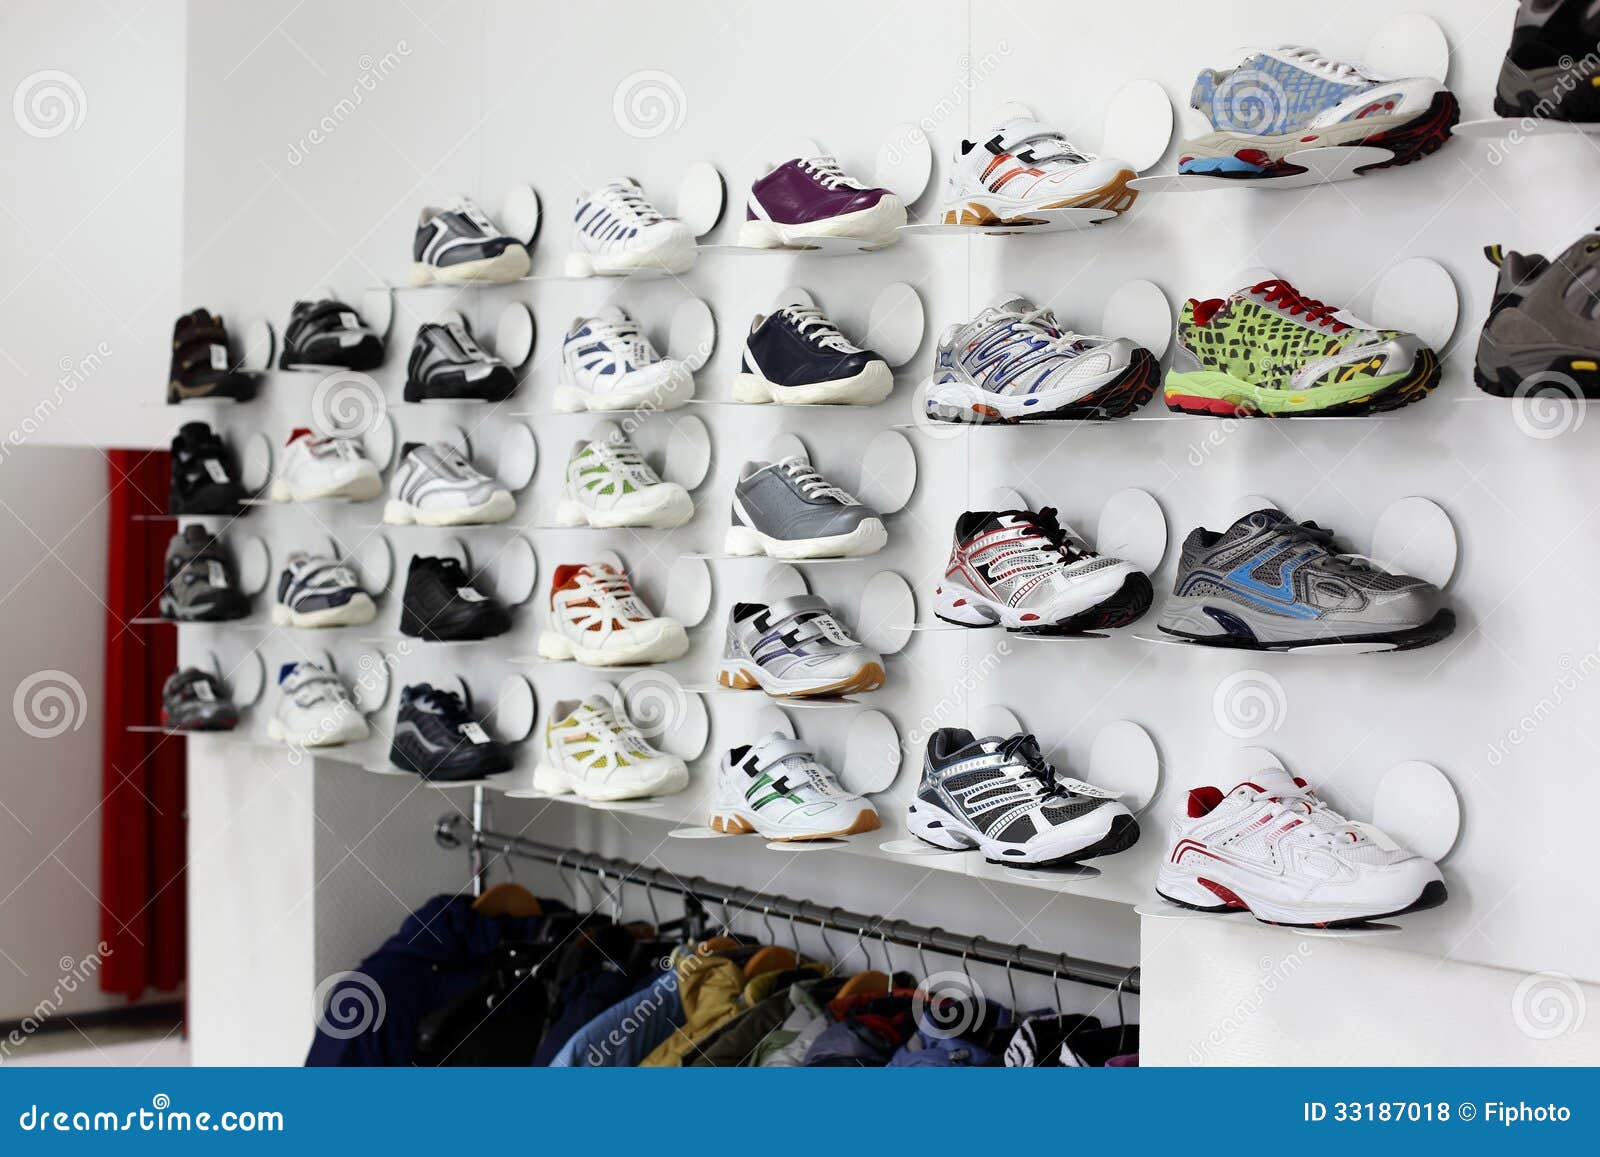 Bright and Clean Shoes Store Stock Photo - Image of downtown ...